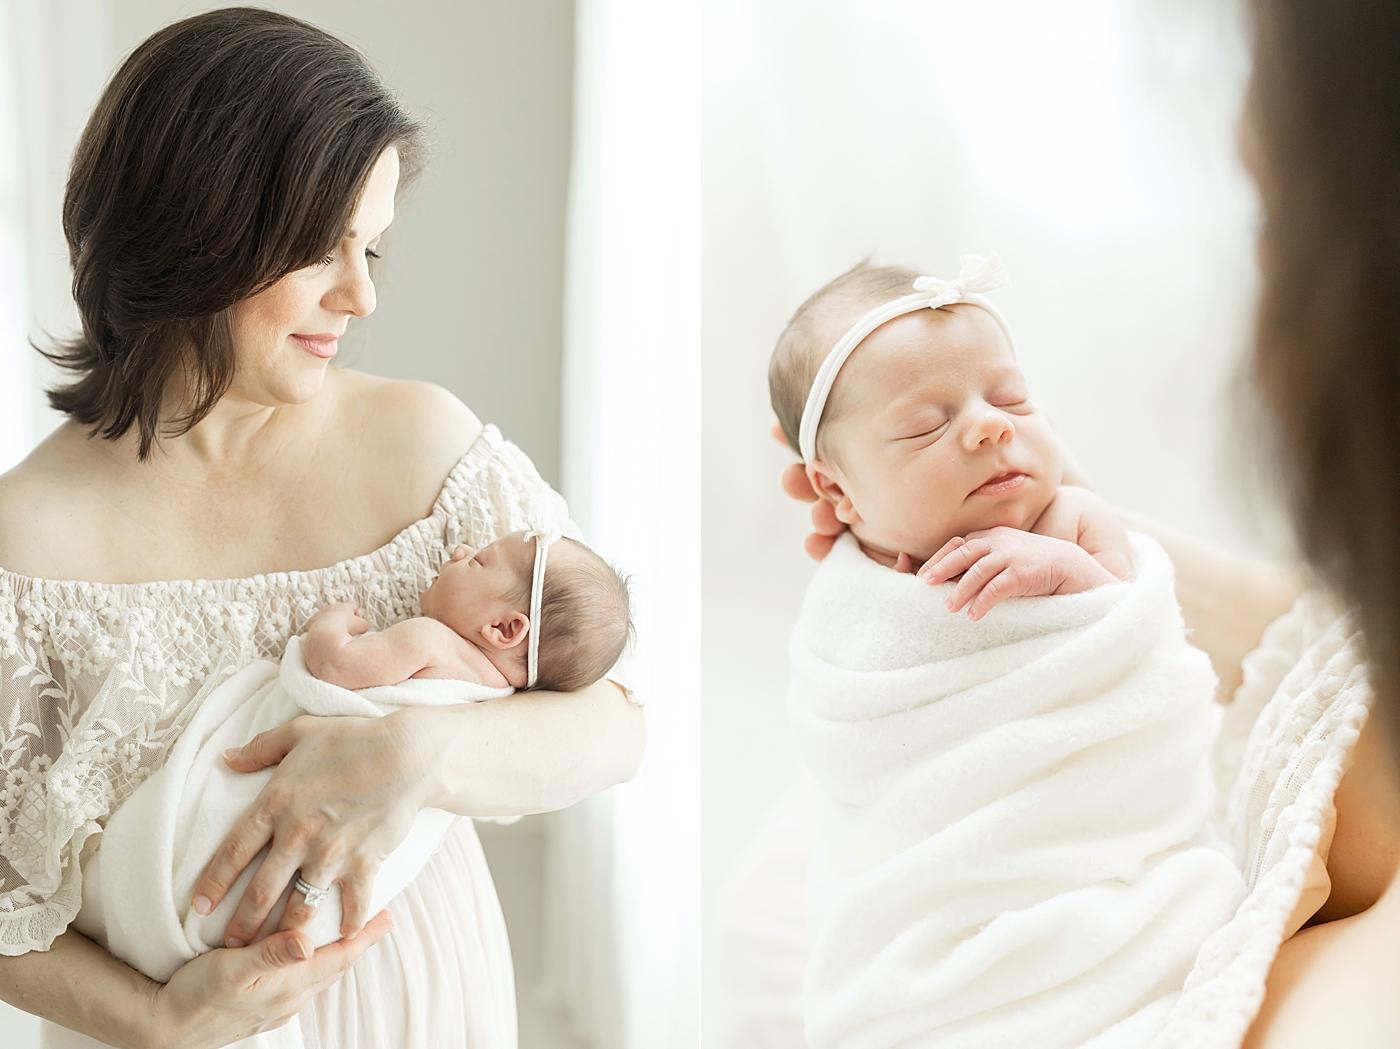 Mom adoring her baby girl during her newborn photoshoot. Photos by Fresh Light Photography.